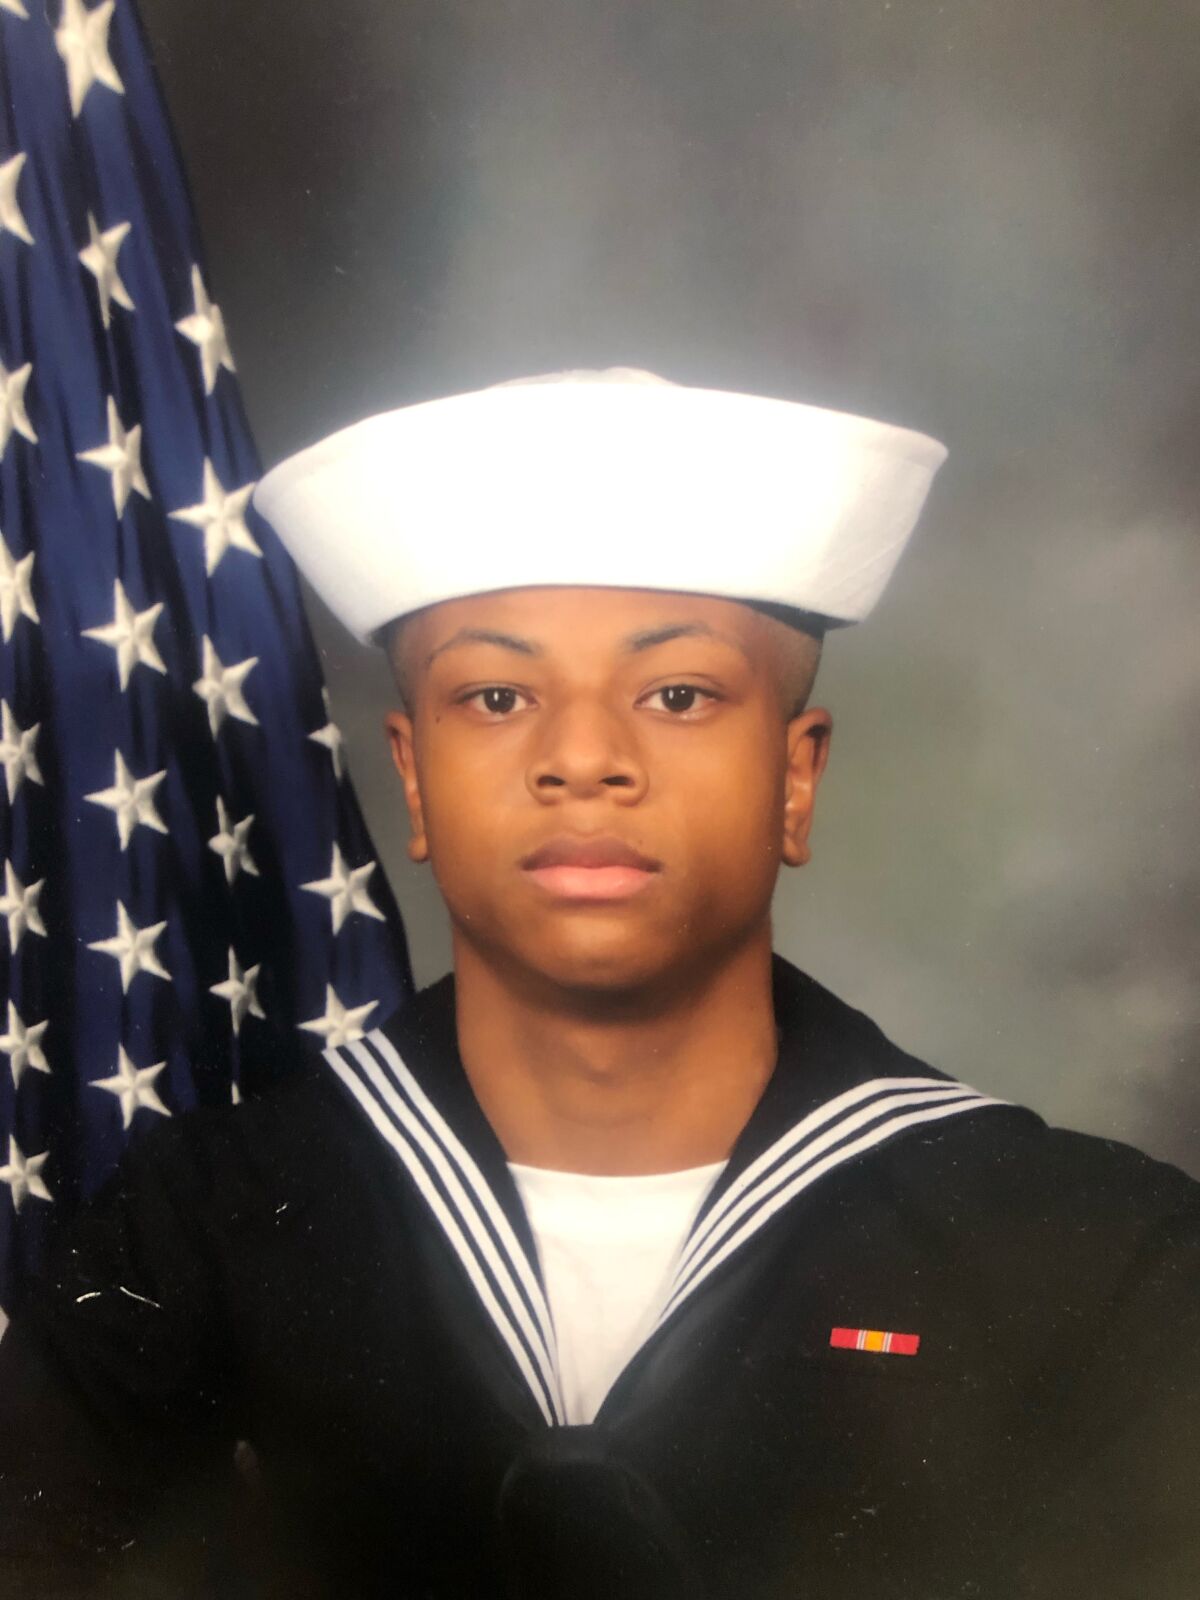 Navy sailor Lamontee Stevenson was fatally shot Aug. 17, 2019 at a house party in Logan Heights.